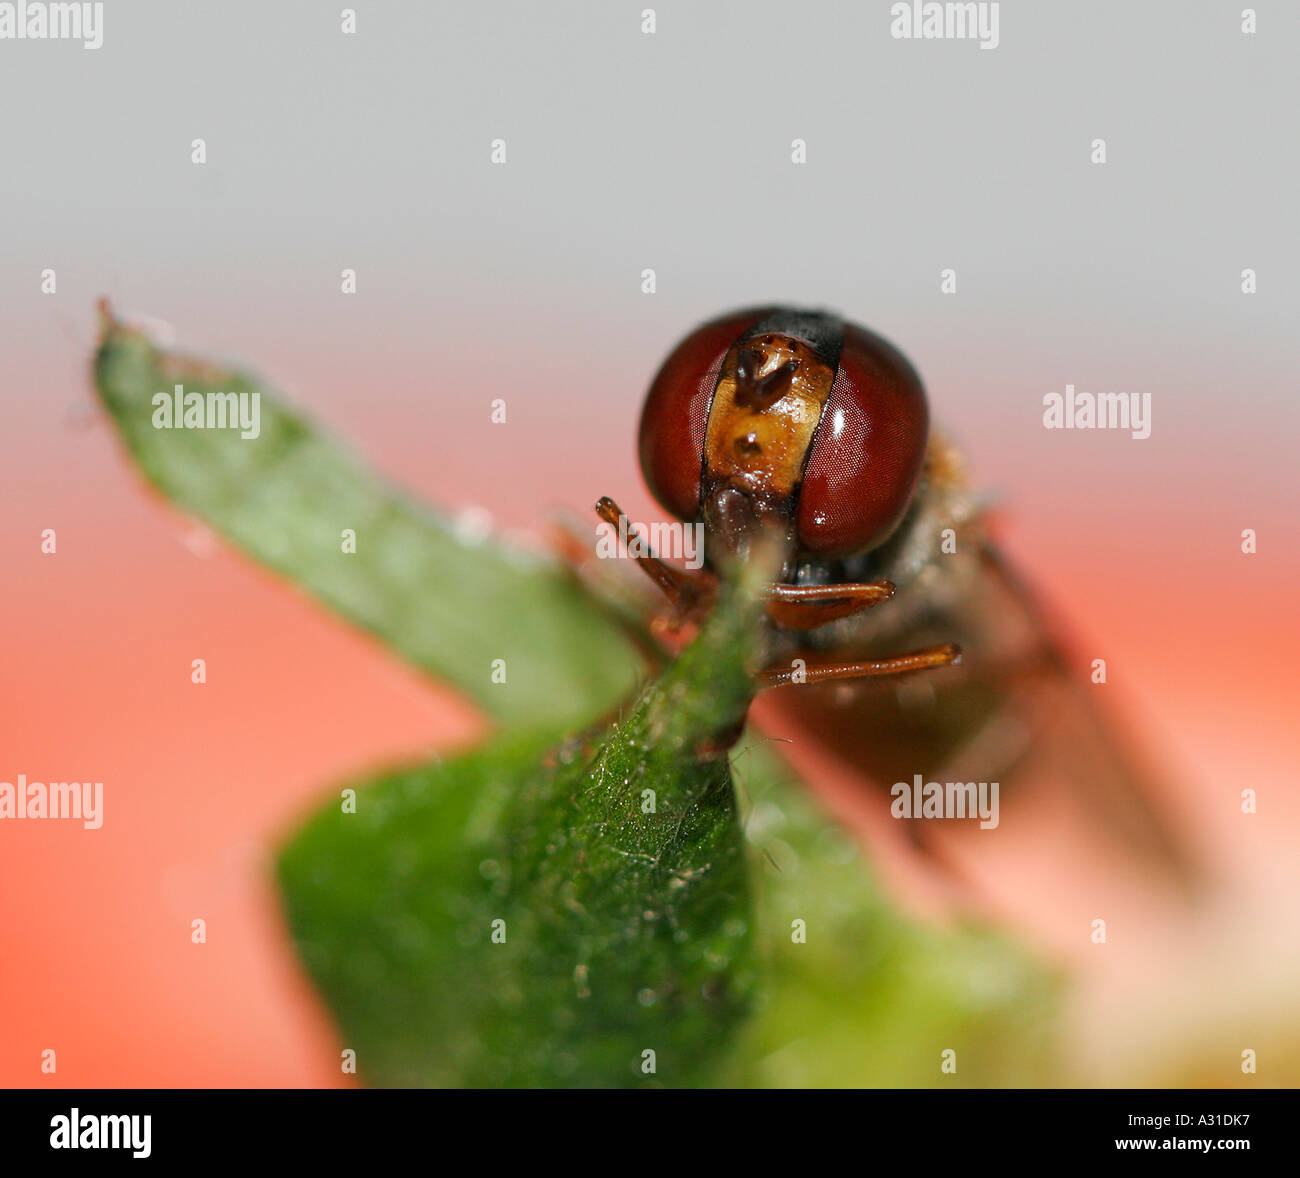 Close up of a fly sitting on a leaf Stock Photo